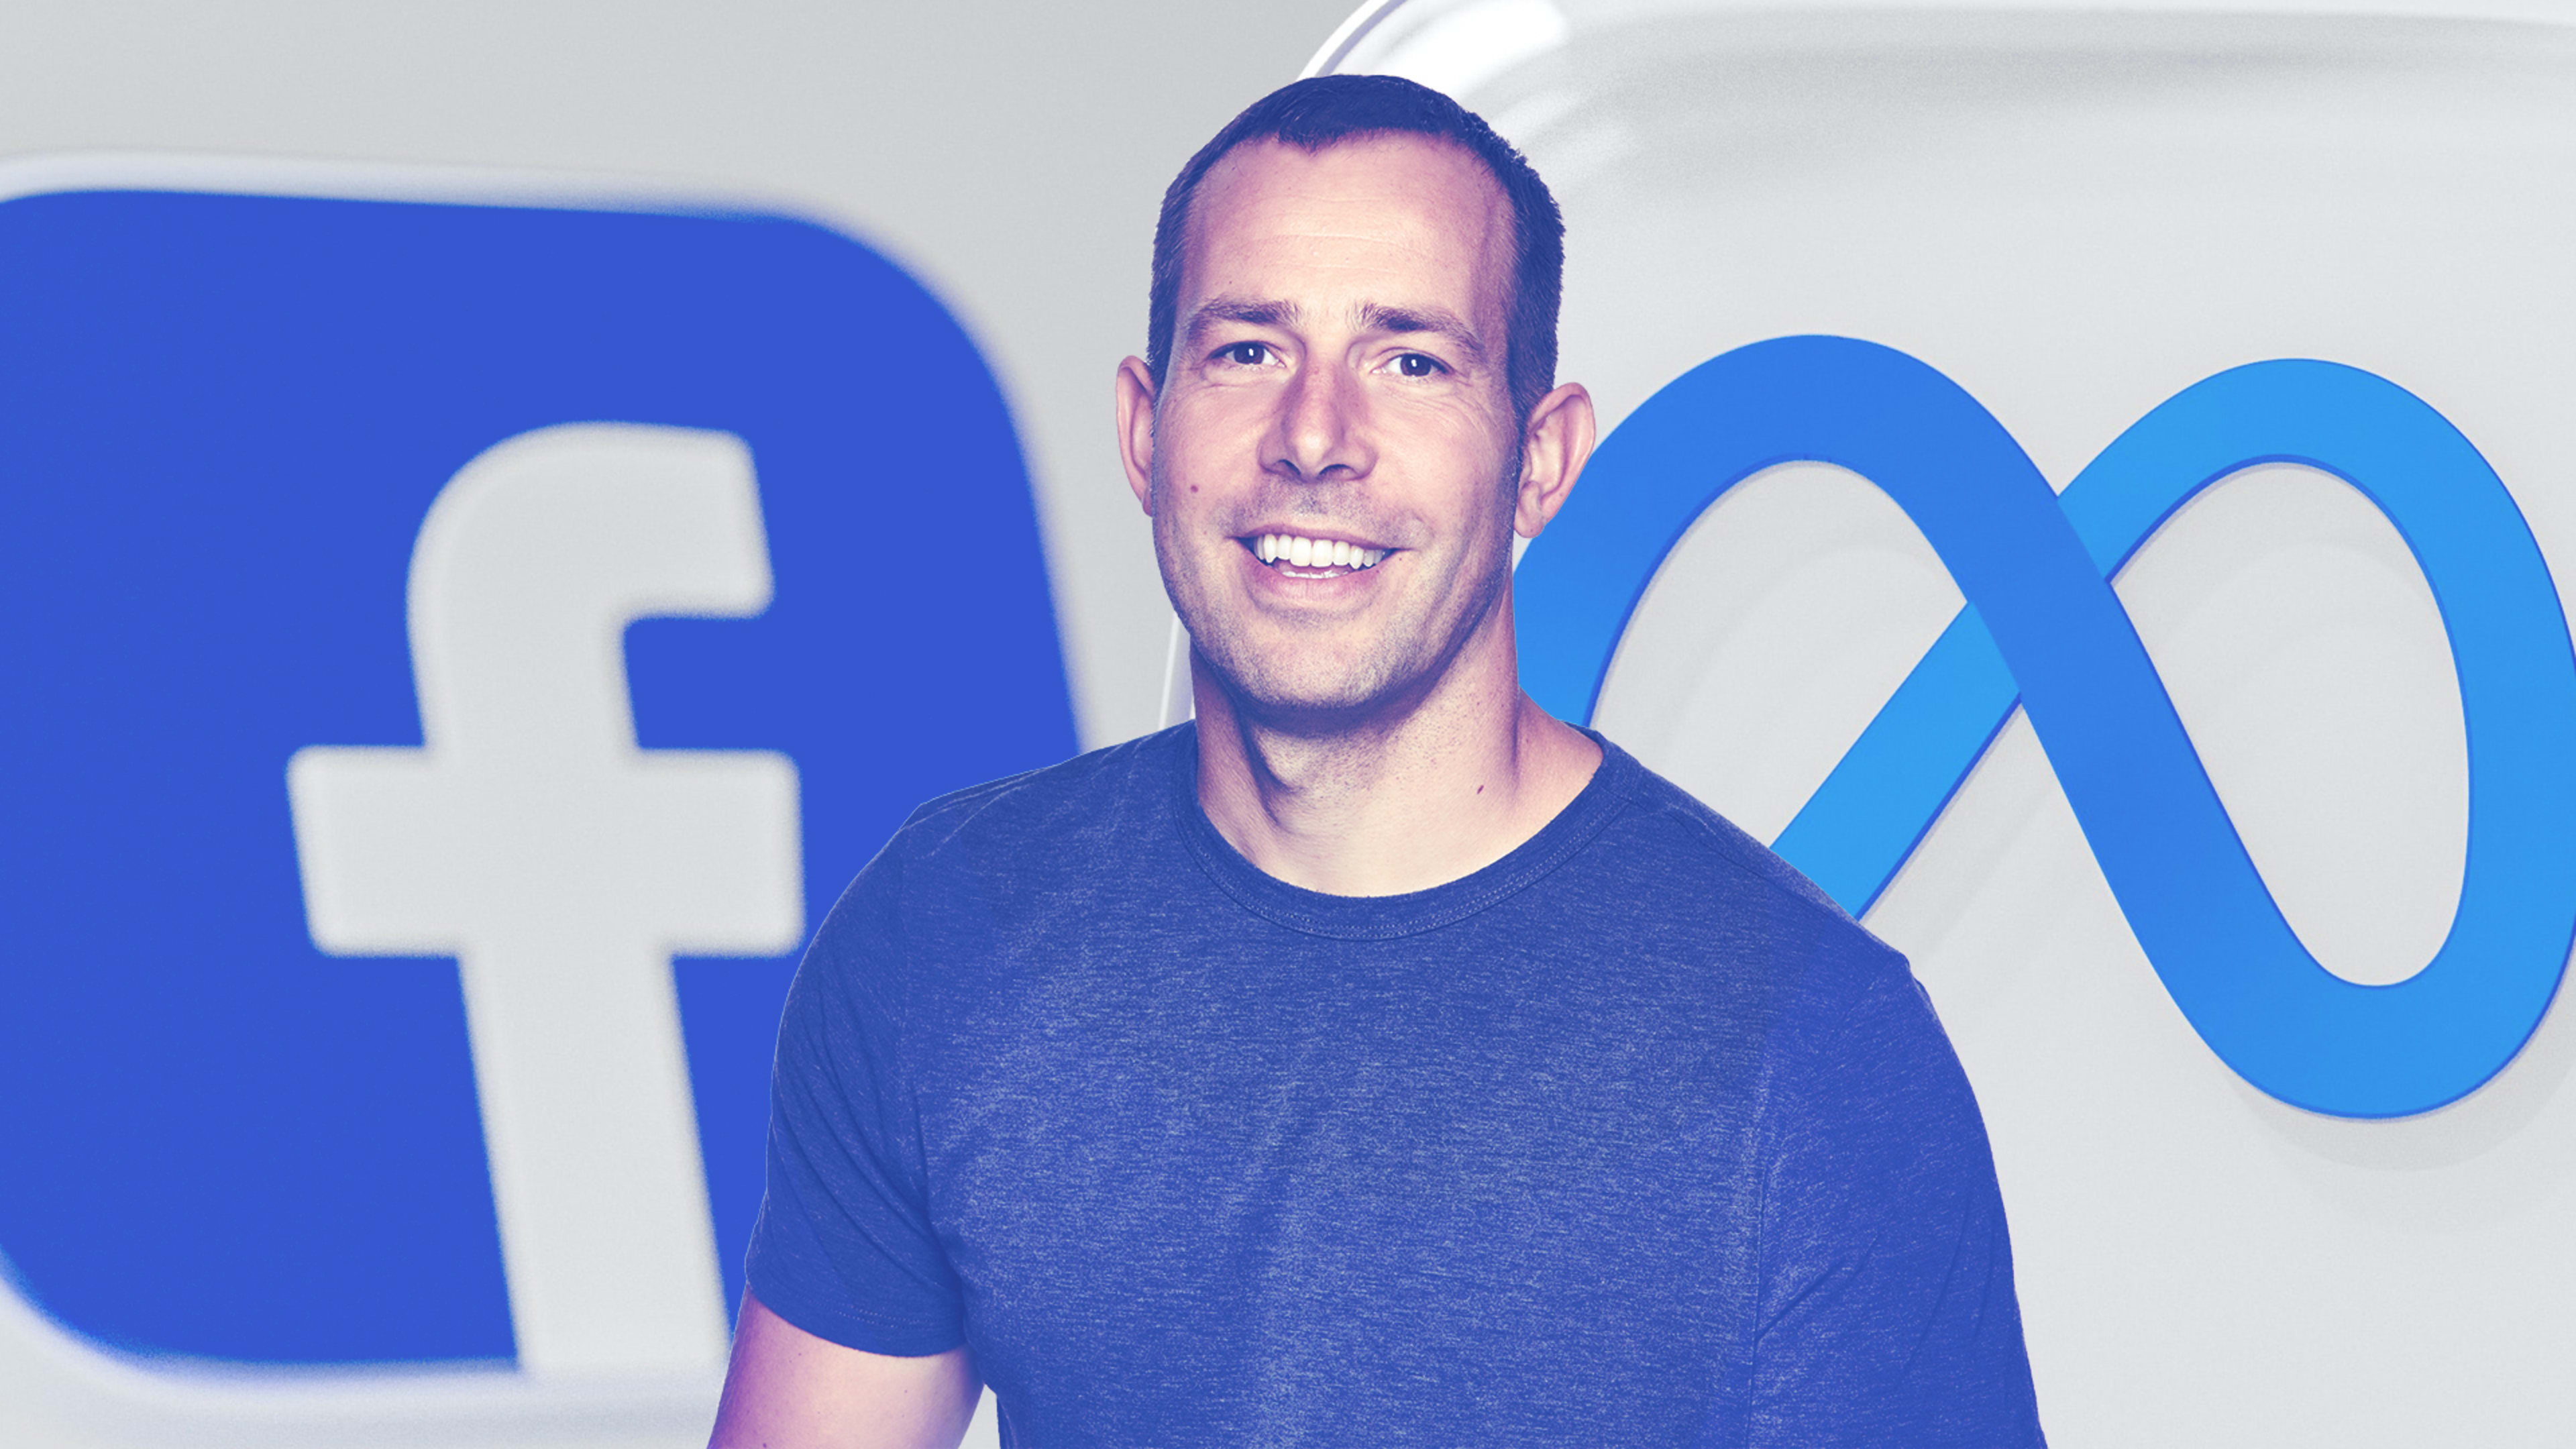 What we know about Javier Olivan, Facebook-parent Meta’s new COO